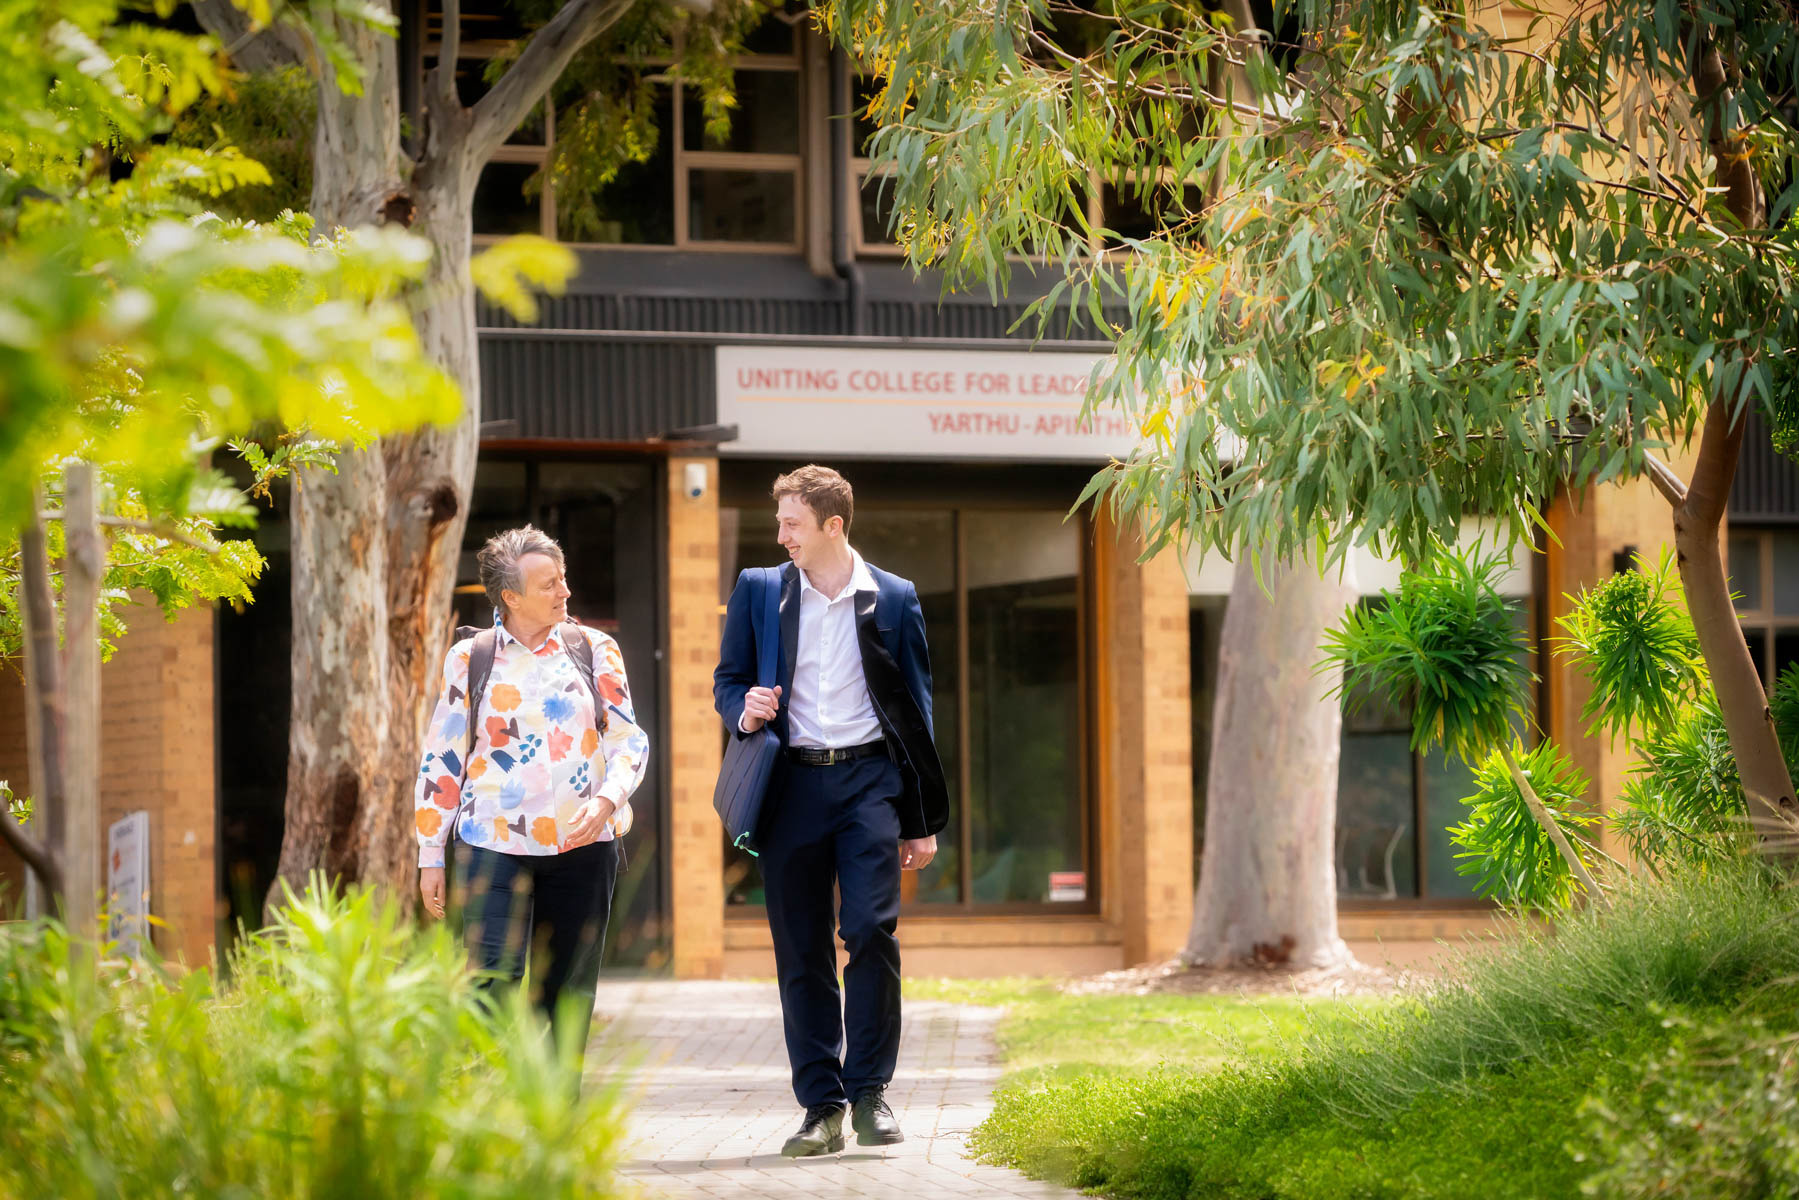 Two students walk outside Uniting College for Leadership and Theology with gumtrees bordering the path.